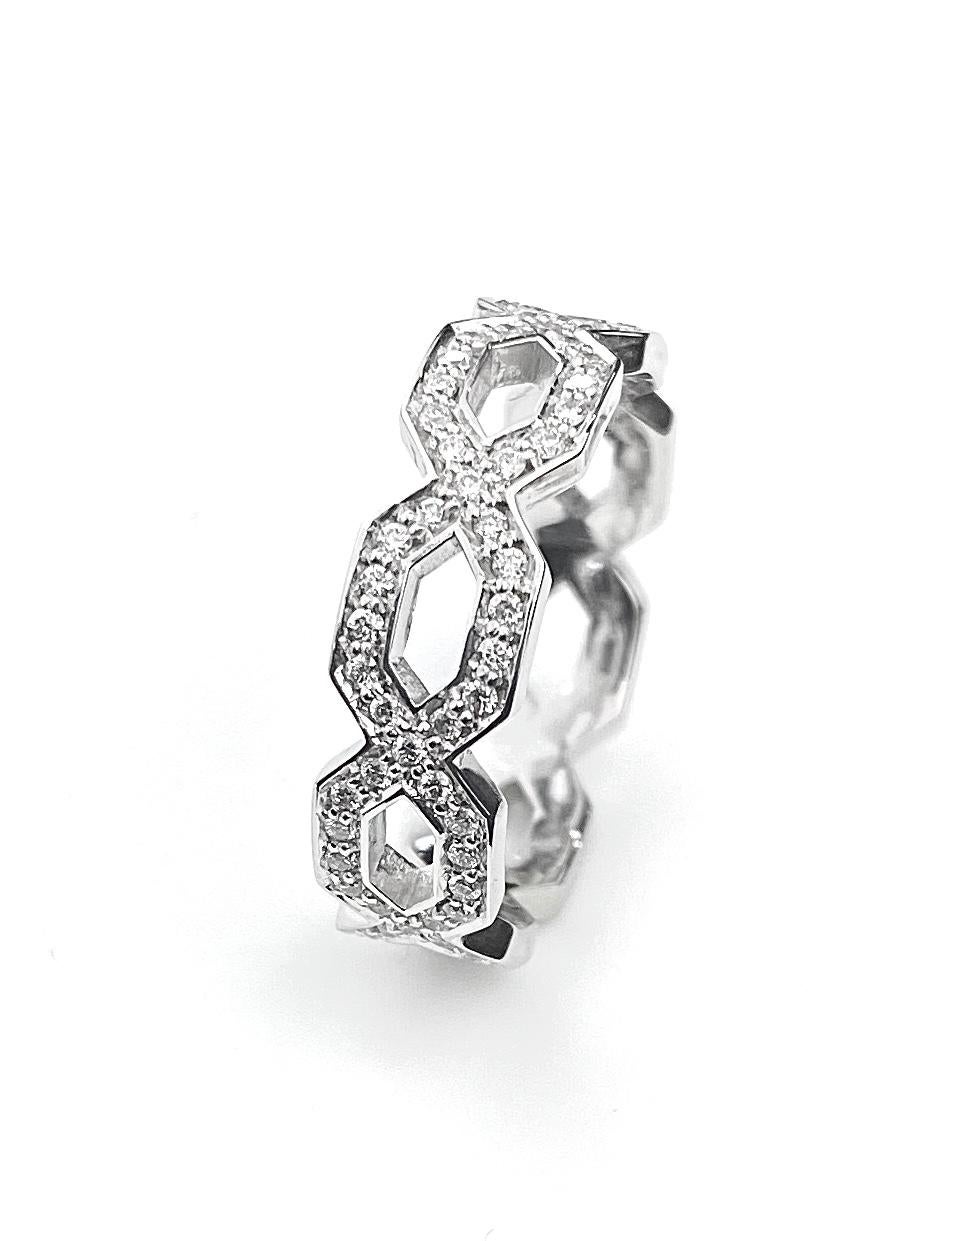 Diamond Eternity Ring with Weave Pattern in White Gold In New Condition For Sale In Toronto, Ontario